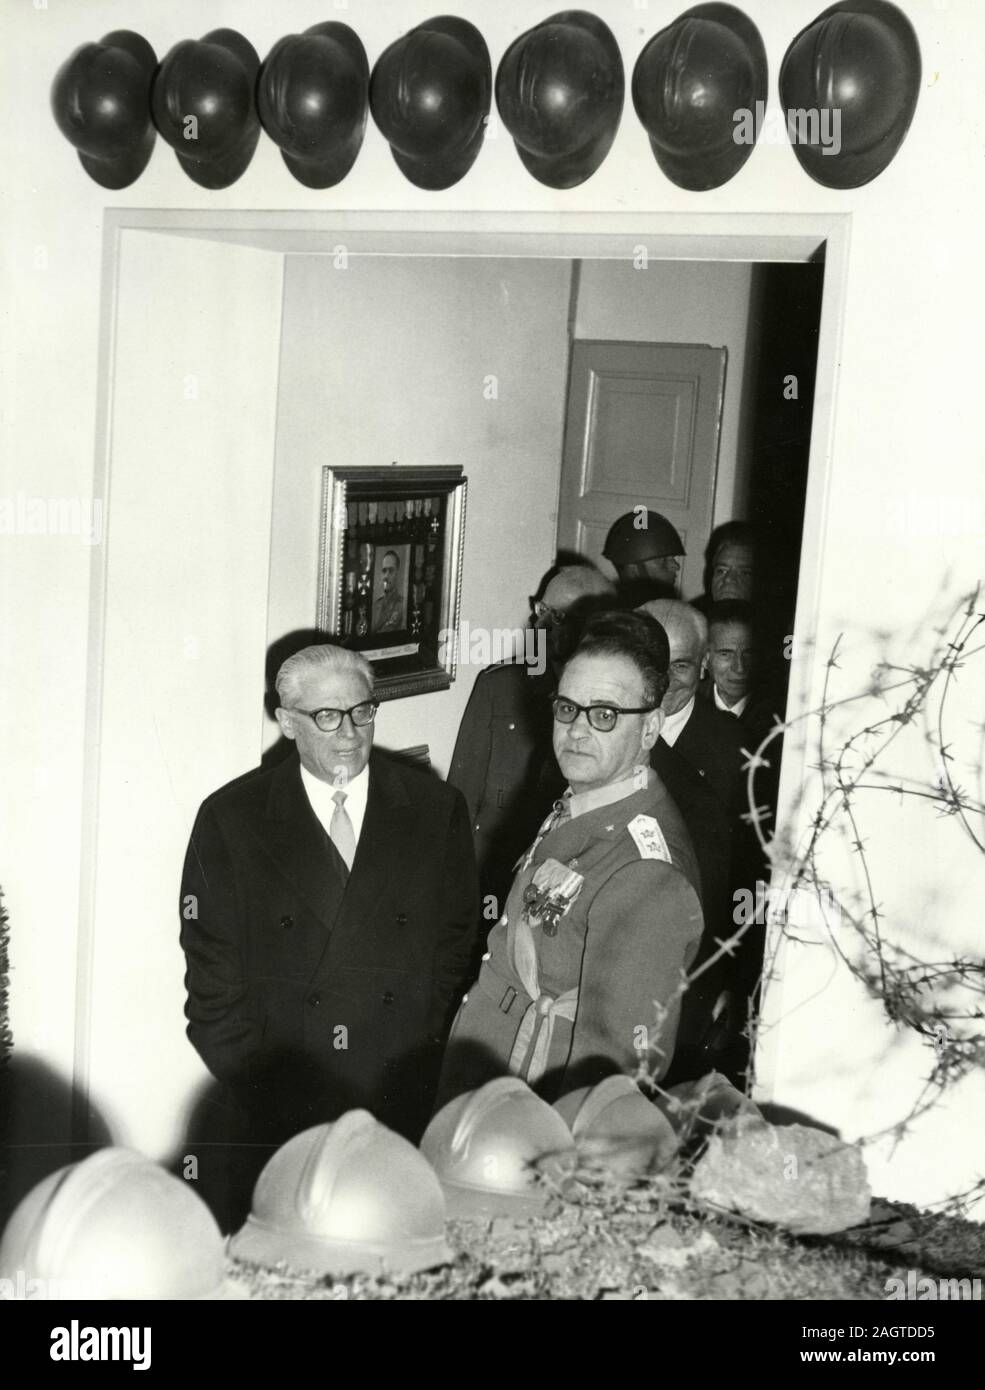 Italian President of the Republic Giovanni Gronchi at the opening of the National Historical museum of Infantry, Rome, Italy 1959 Stock Photo